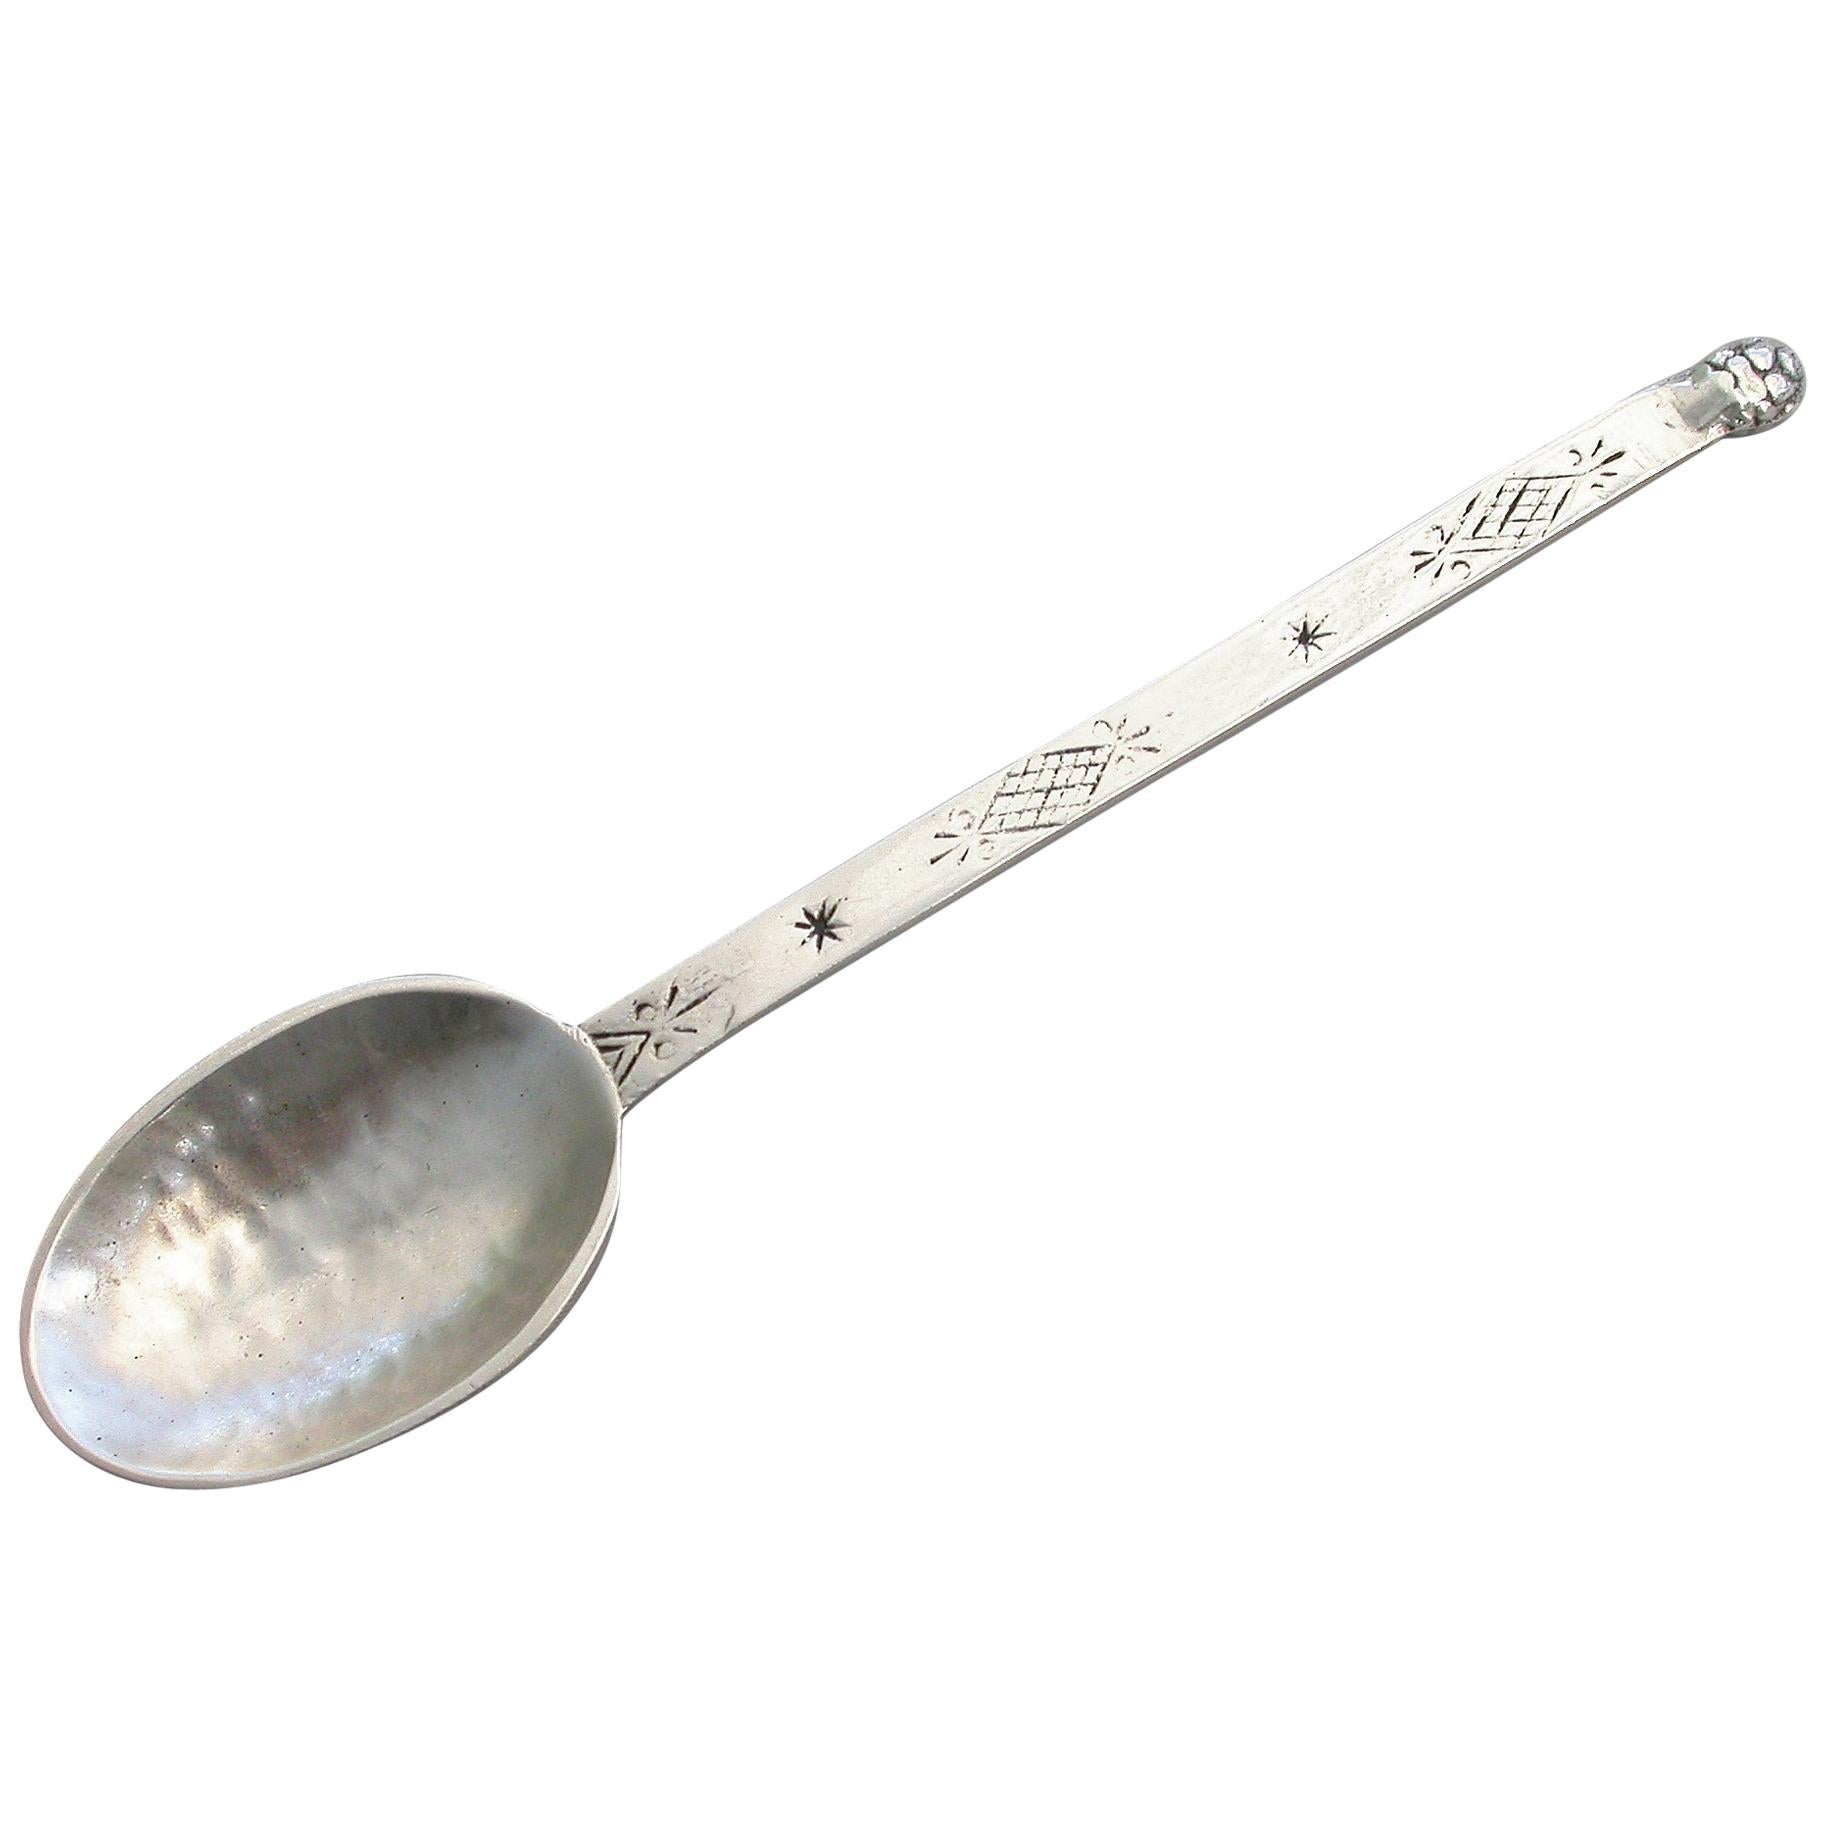 Arts & Crafts Hammered Silver Spoon by Francis Harling, London, 1926